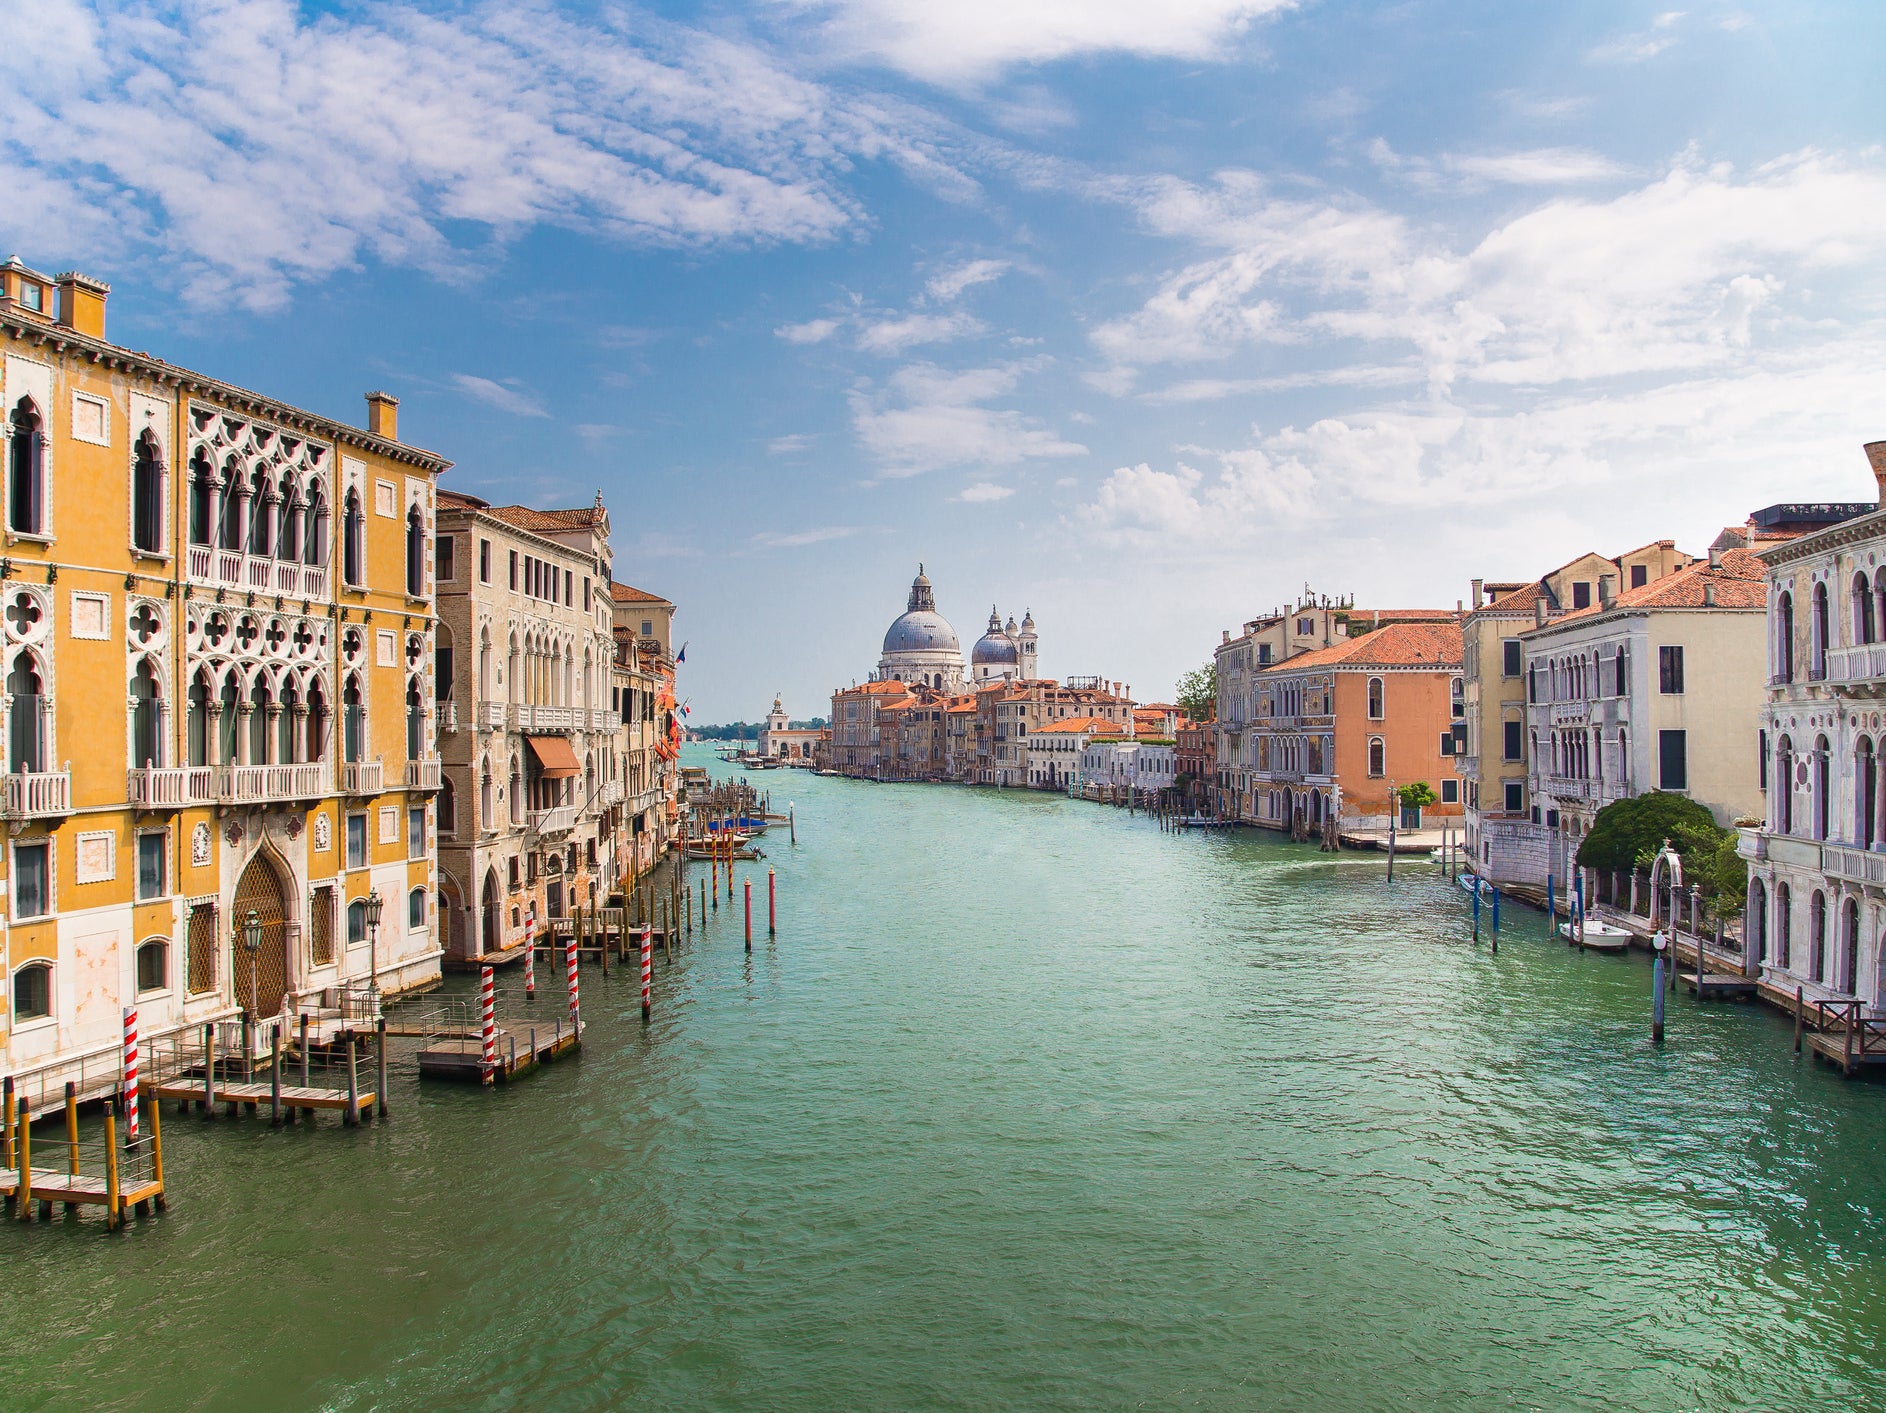 Venice has been a world heritage site for more than 35 years